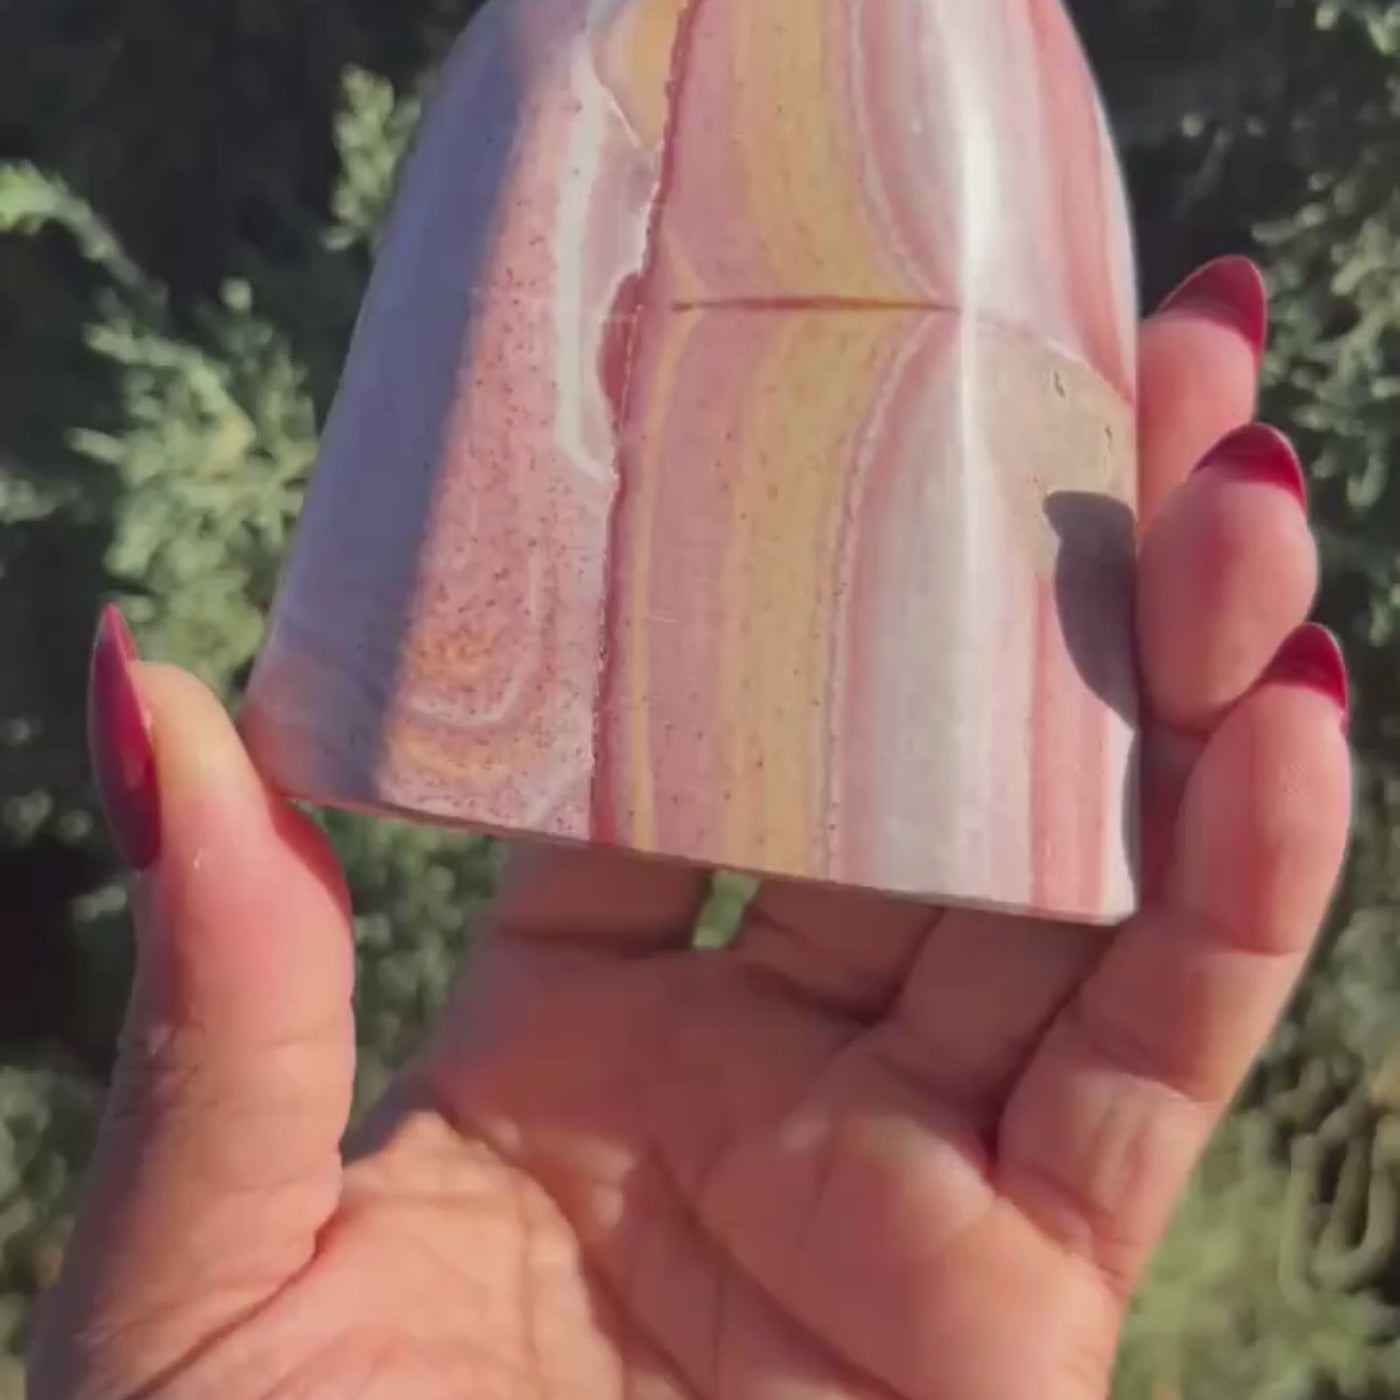 Short video of woman holding up and turning around a Rainbow Rhyolite freeform crystal to show detail by Energy Muse